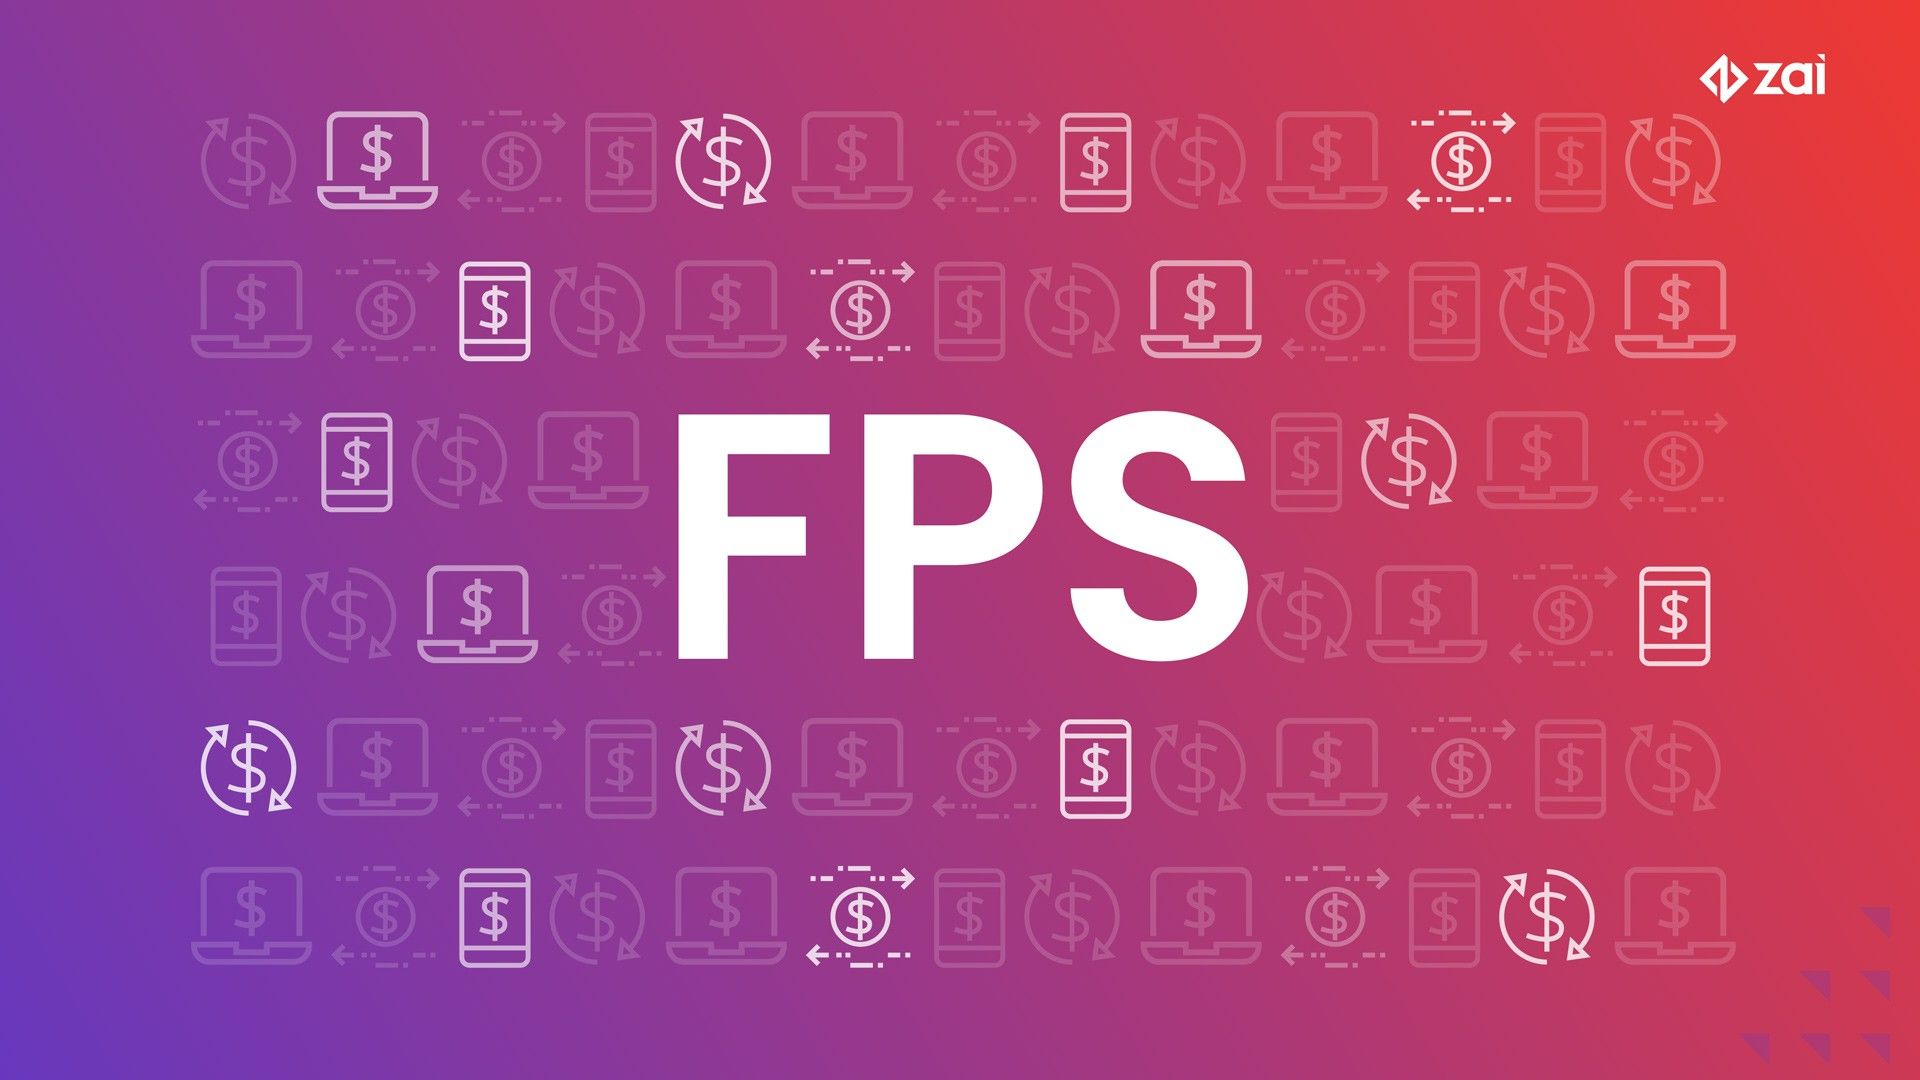 A guide to Faster Payments Service (FPS)